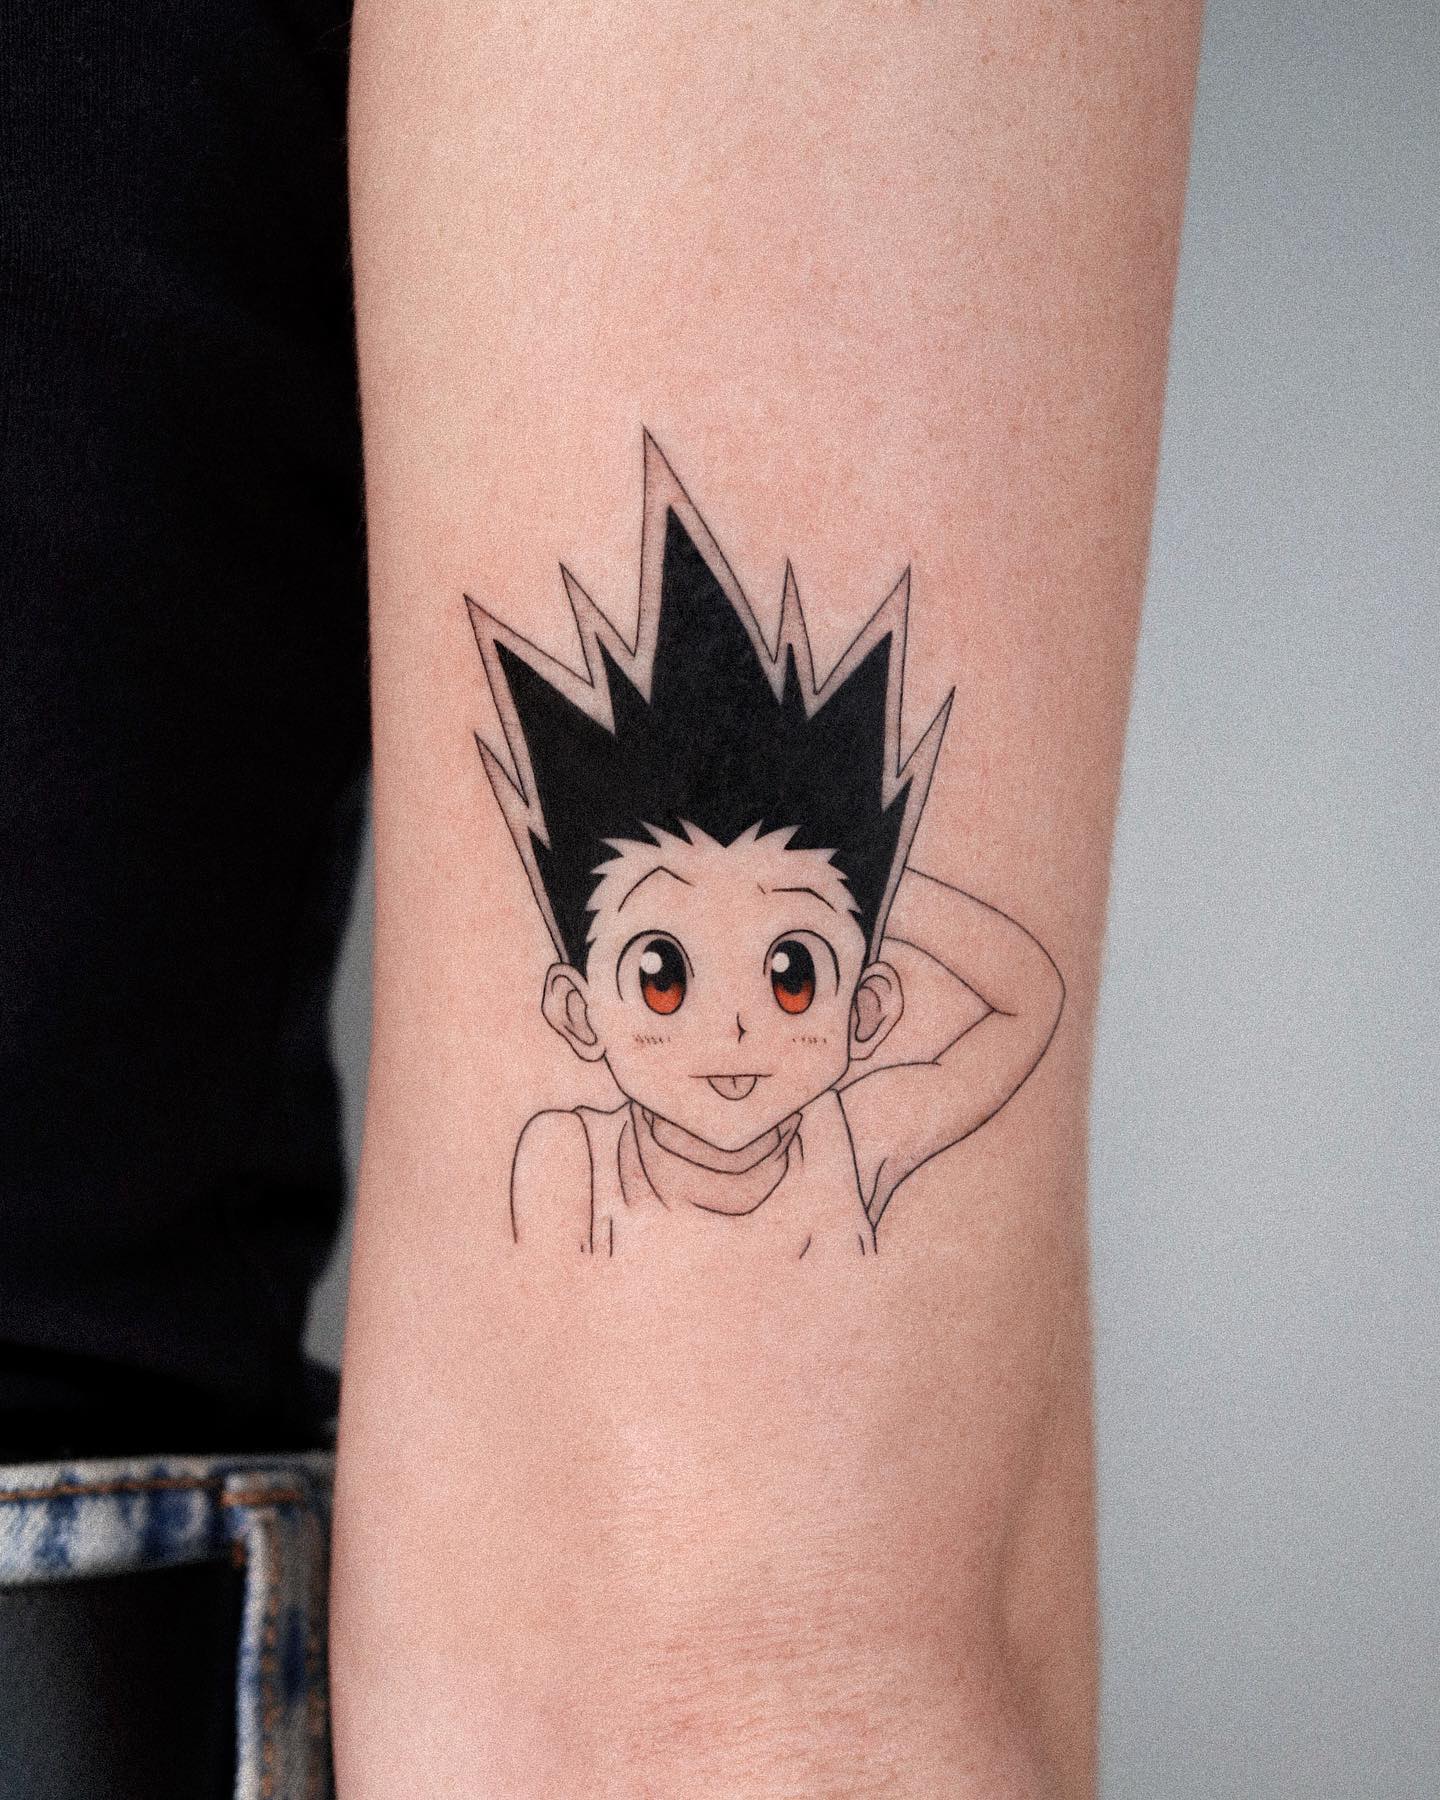 My Gon and Killua tattoo done by Katie McDuffie theghostkat posted this  a while ago on rtattoos and I dont think it got the love it deserved   rHunterXHunter